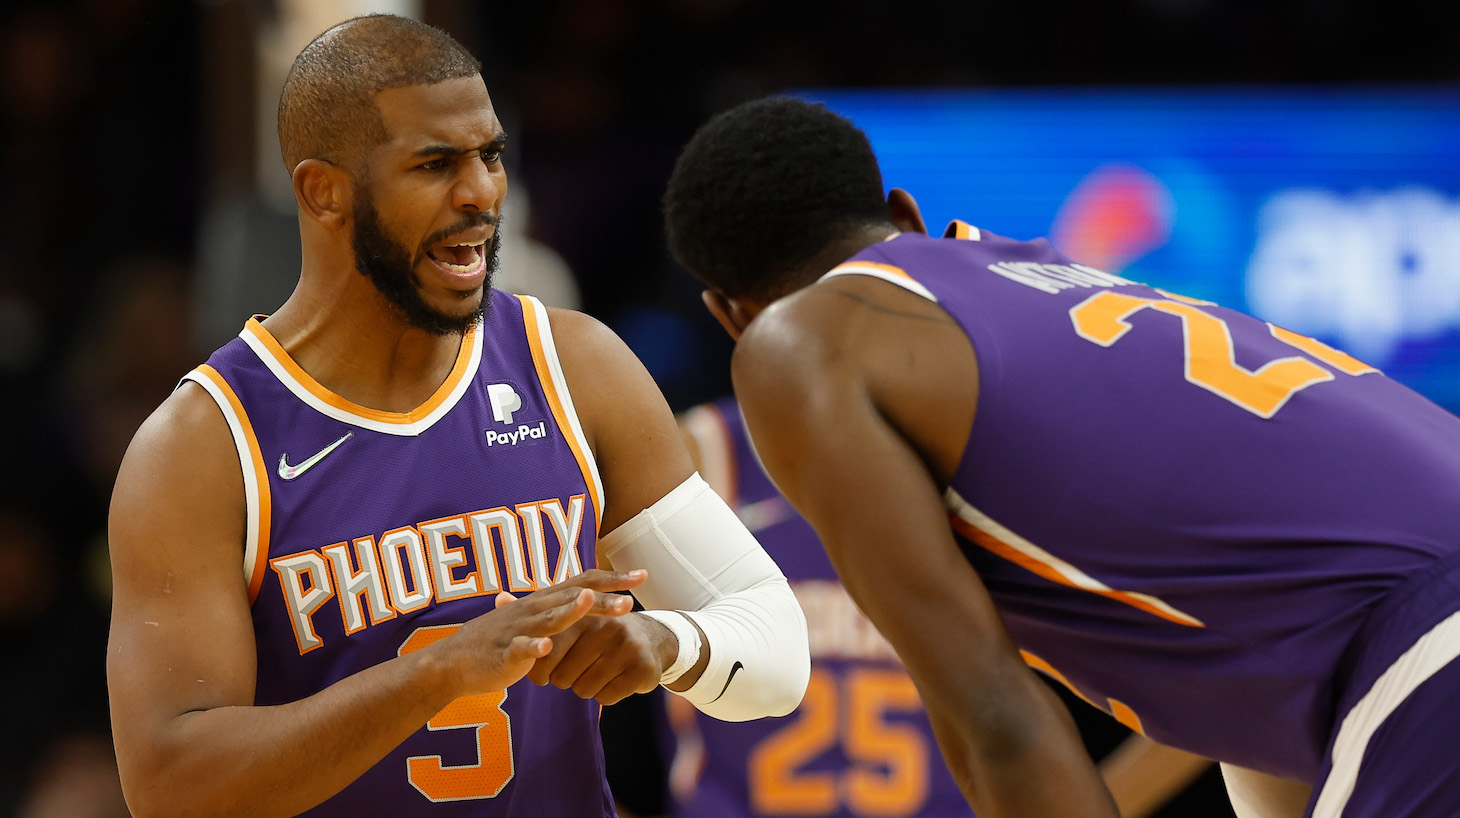 PHOENIX, ARIZONA - FEBRUARY 16: Chris Paul #3 of the Phoenix Suns reacts after an injury to his hand and a technical-foul during the second half of the NBA game against the Houston Rockets at Footprint Center on February 16, 2022 in Phoenix, Arizona. The Suns defeated the Rockets 124-121. NOTE TO USER: User expressly acknowledges and agrees that, by downloading and or using this photograph, User is consenting to the terms and conditions of the Getty Images License Agreement. (Photo by Christian Petersen/Getty Images)